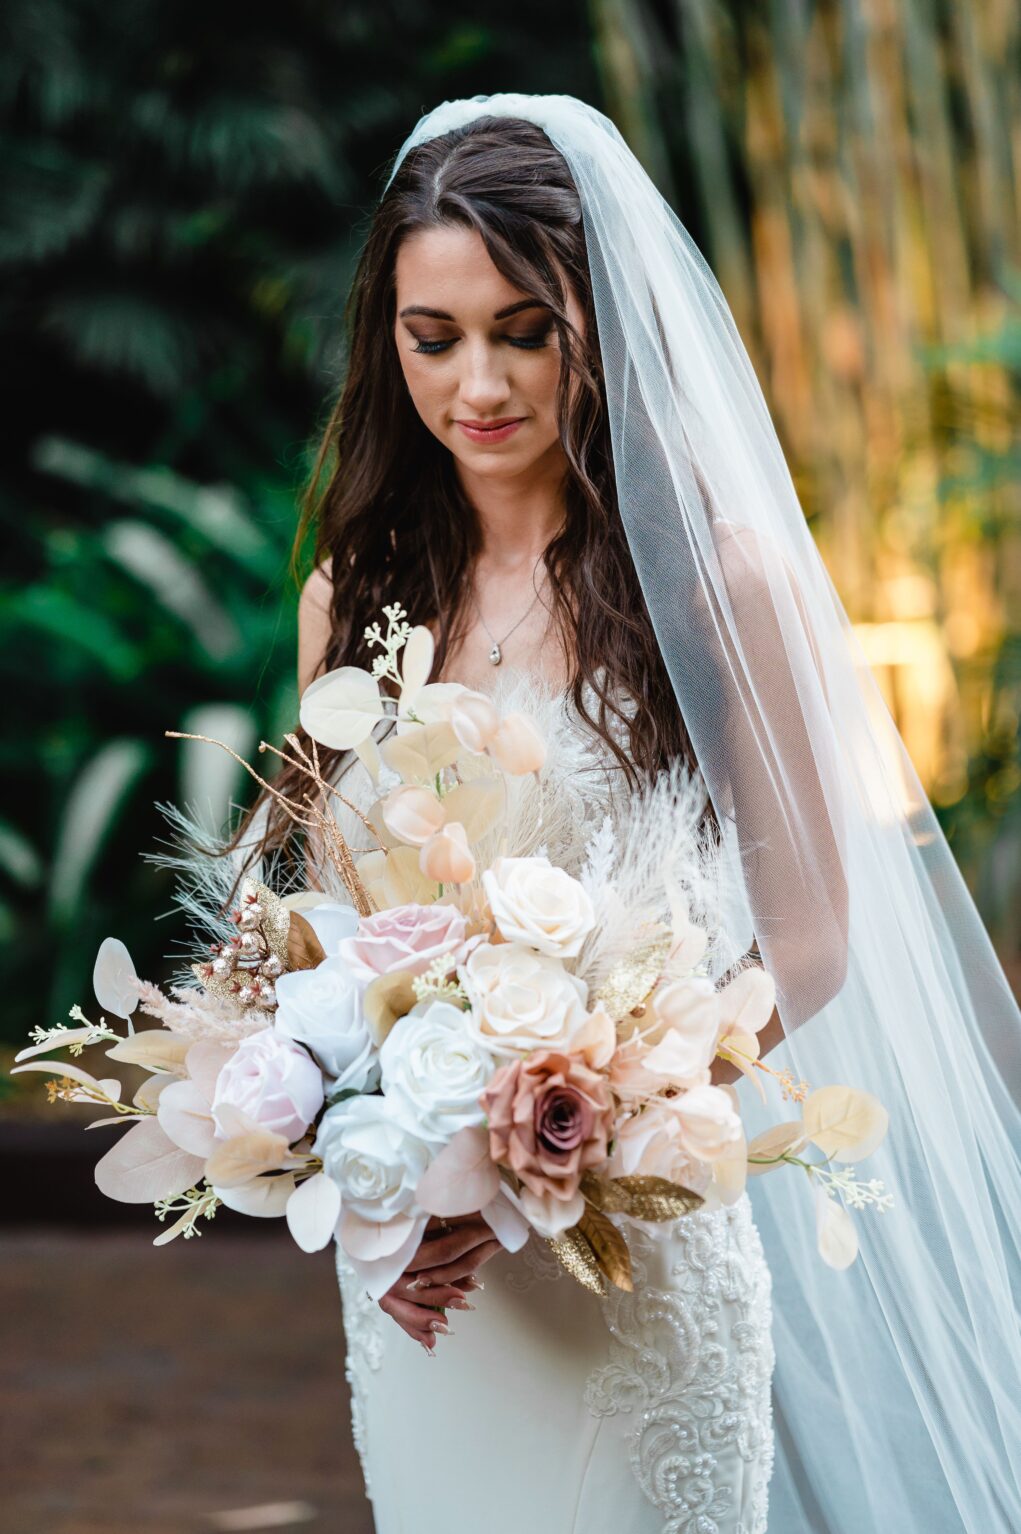 Glam Bridal Portrait with Boho Bridal Bouquet Mix of Dried and Live Florals in Blush and Beige Roses Inspiration | St. Pete Wedding Photographer and Videographer Iyrus Weddings